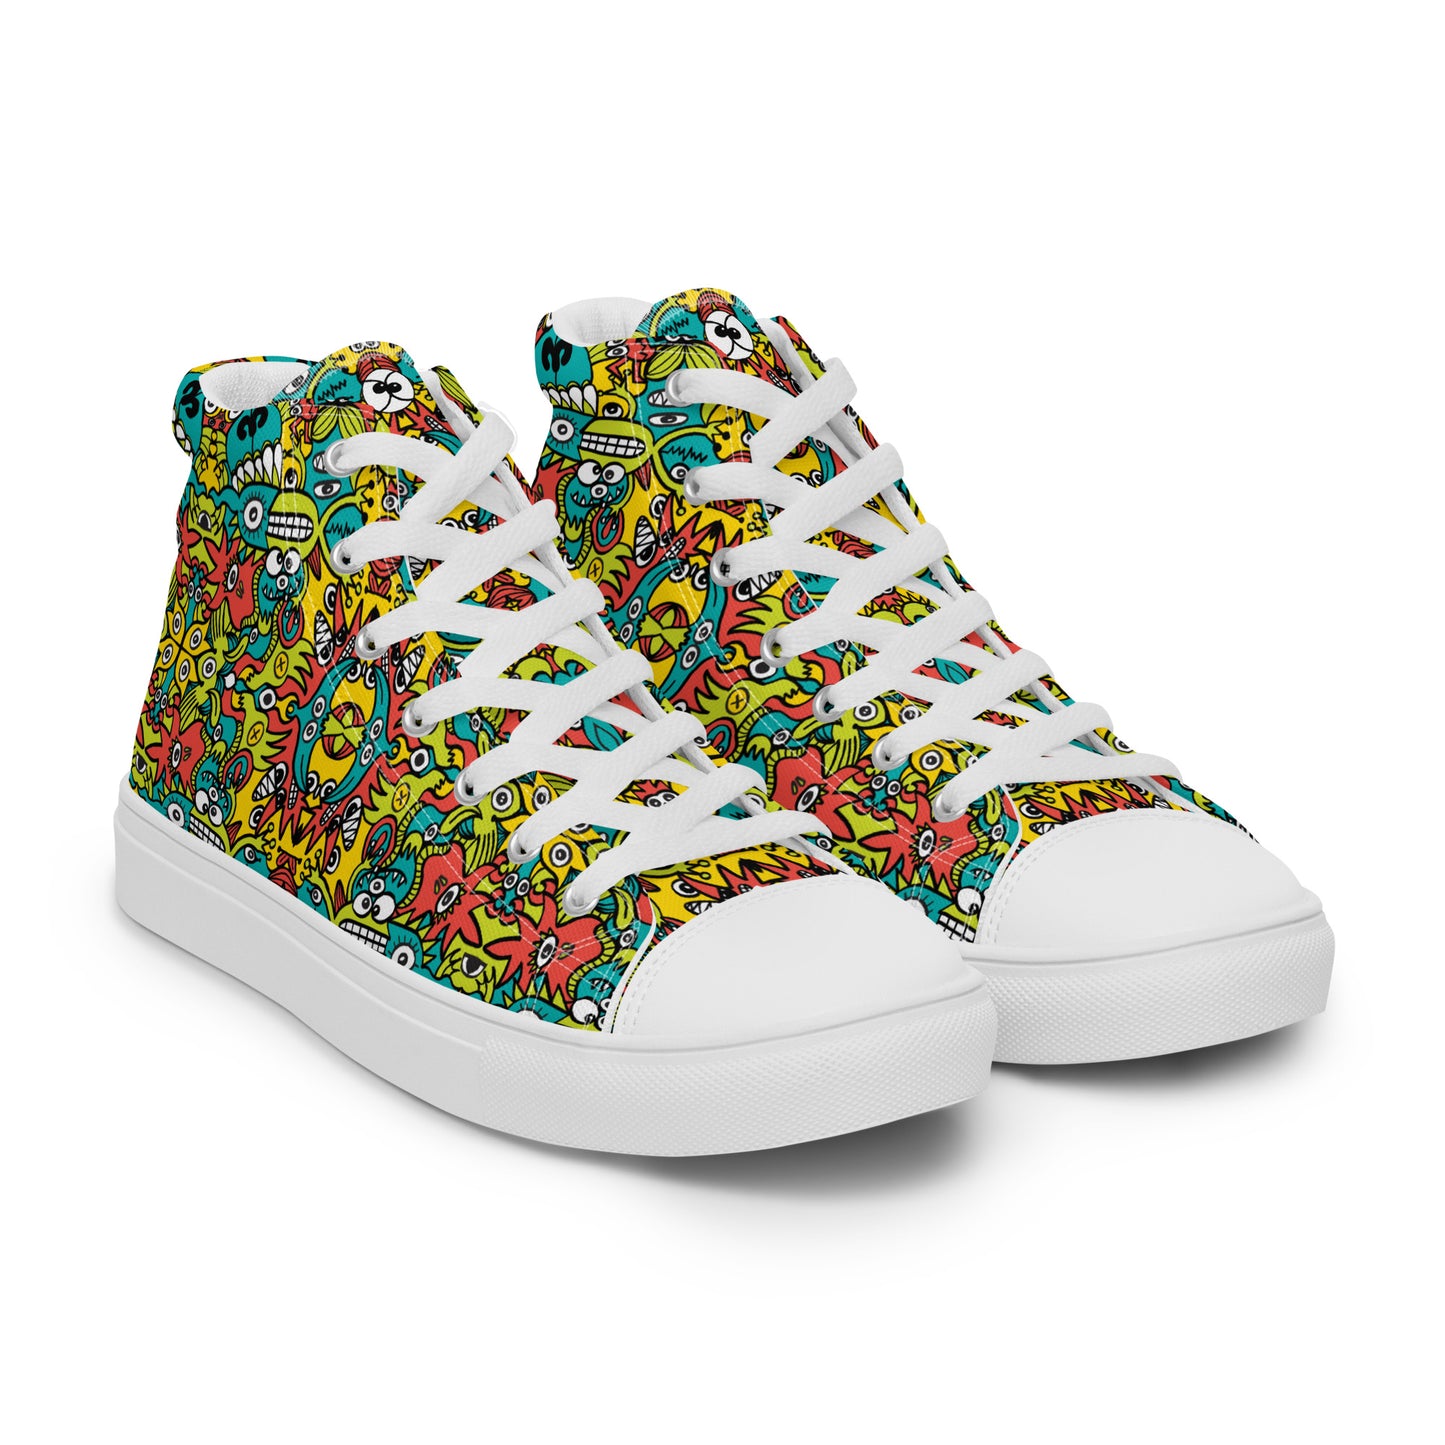 Doodle Dreamscape: Cosmic Critter Carnival - Women’s high top canvas shoes. Overview